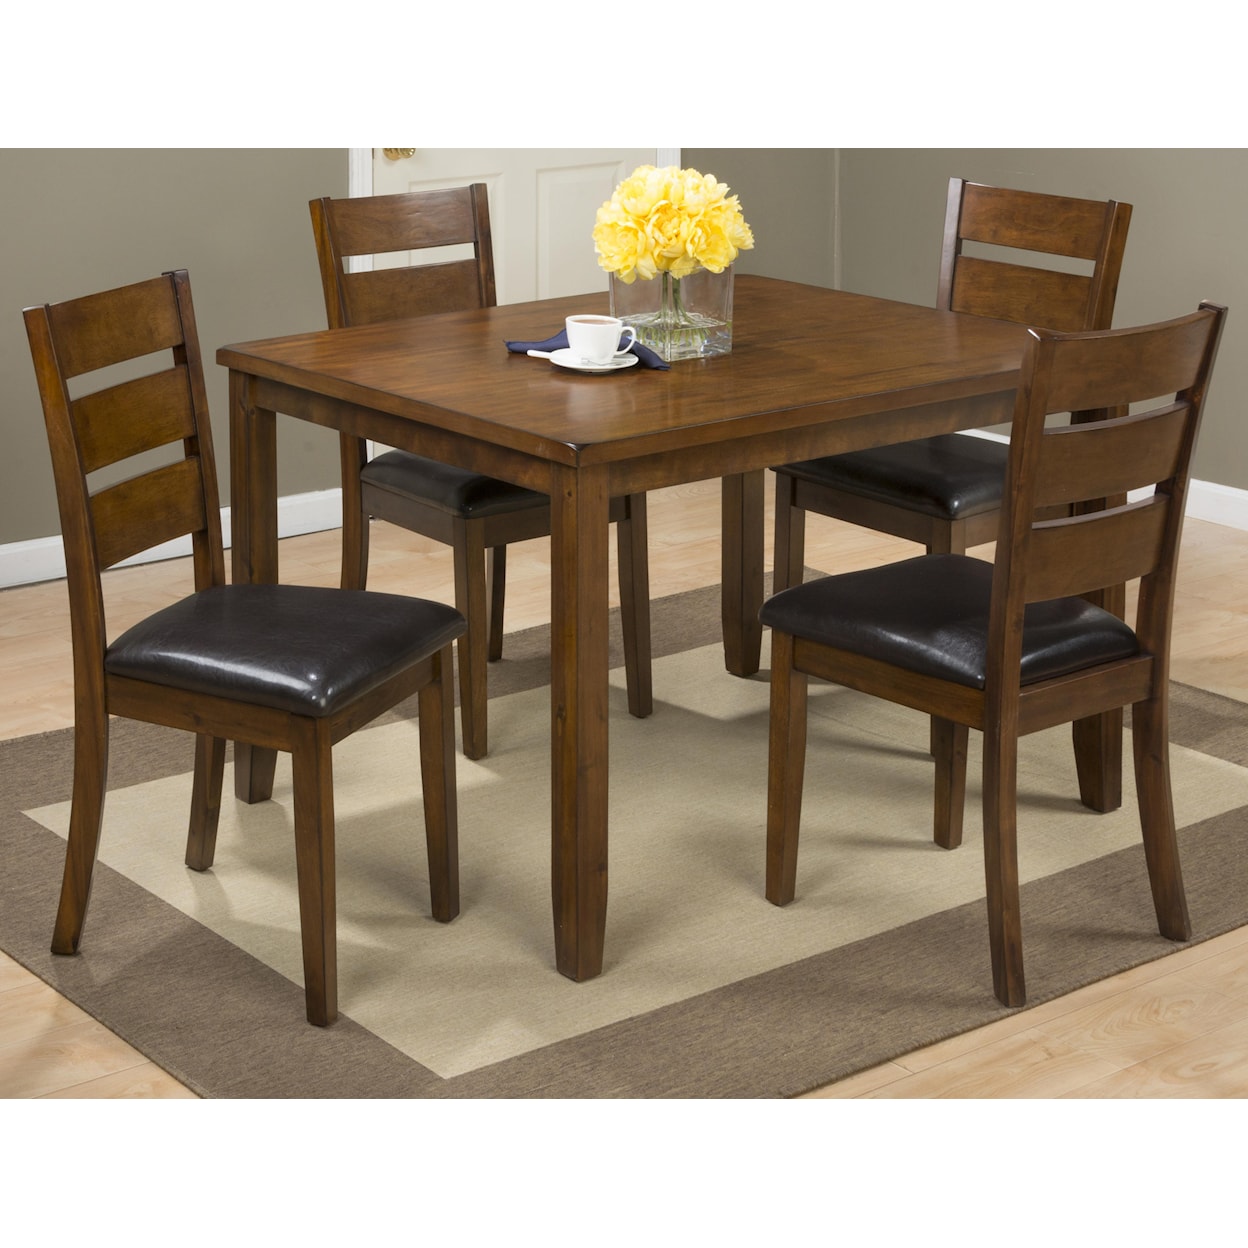 Jofran Plantation 5 Pack- Table with 4 Chairs